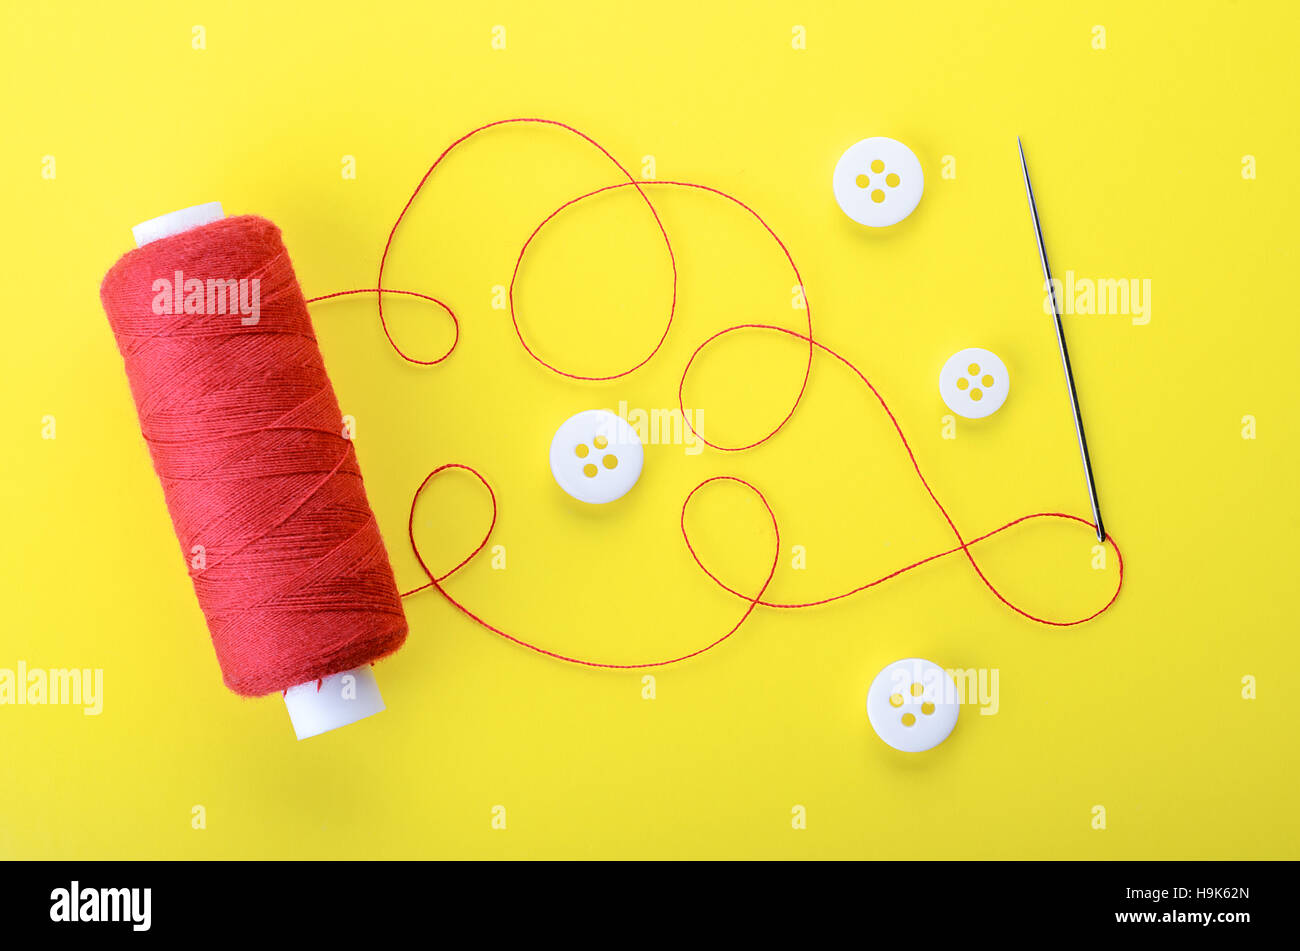 Spool of red thread, needle and clothing buttons on yellow background,  symbol of handmade and needlework. Stock Photo